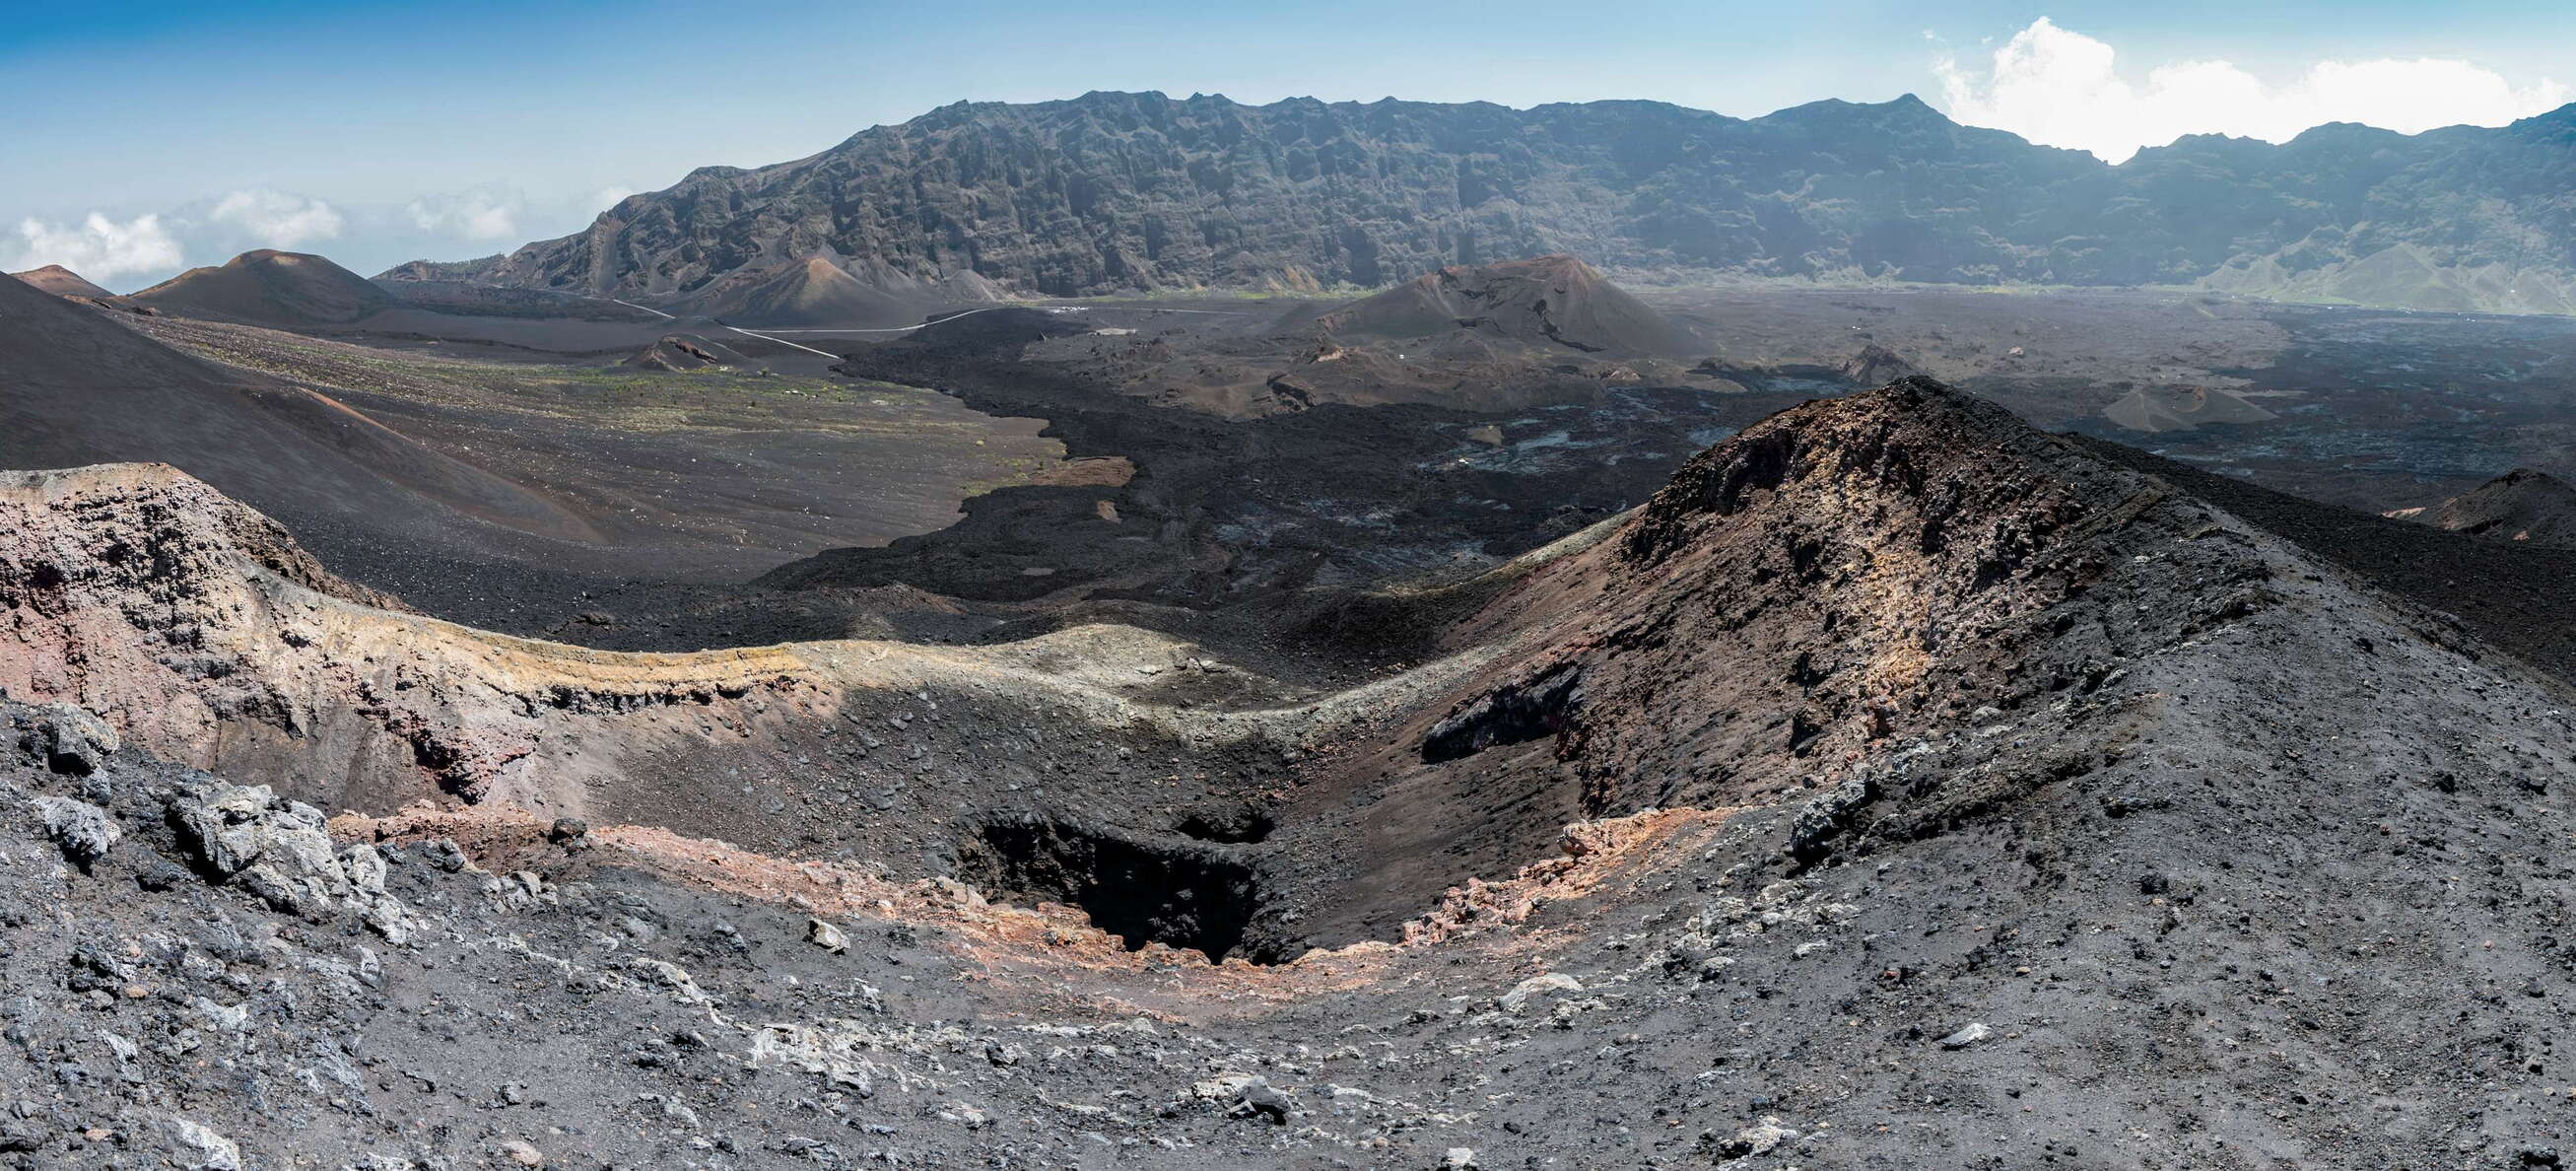 Fogo | Crater and lava flows of 2014/15